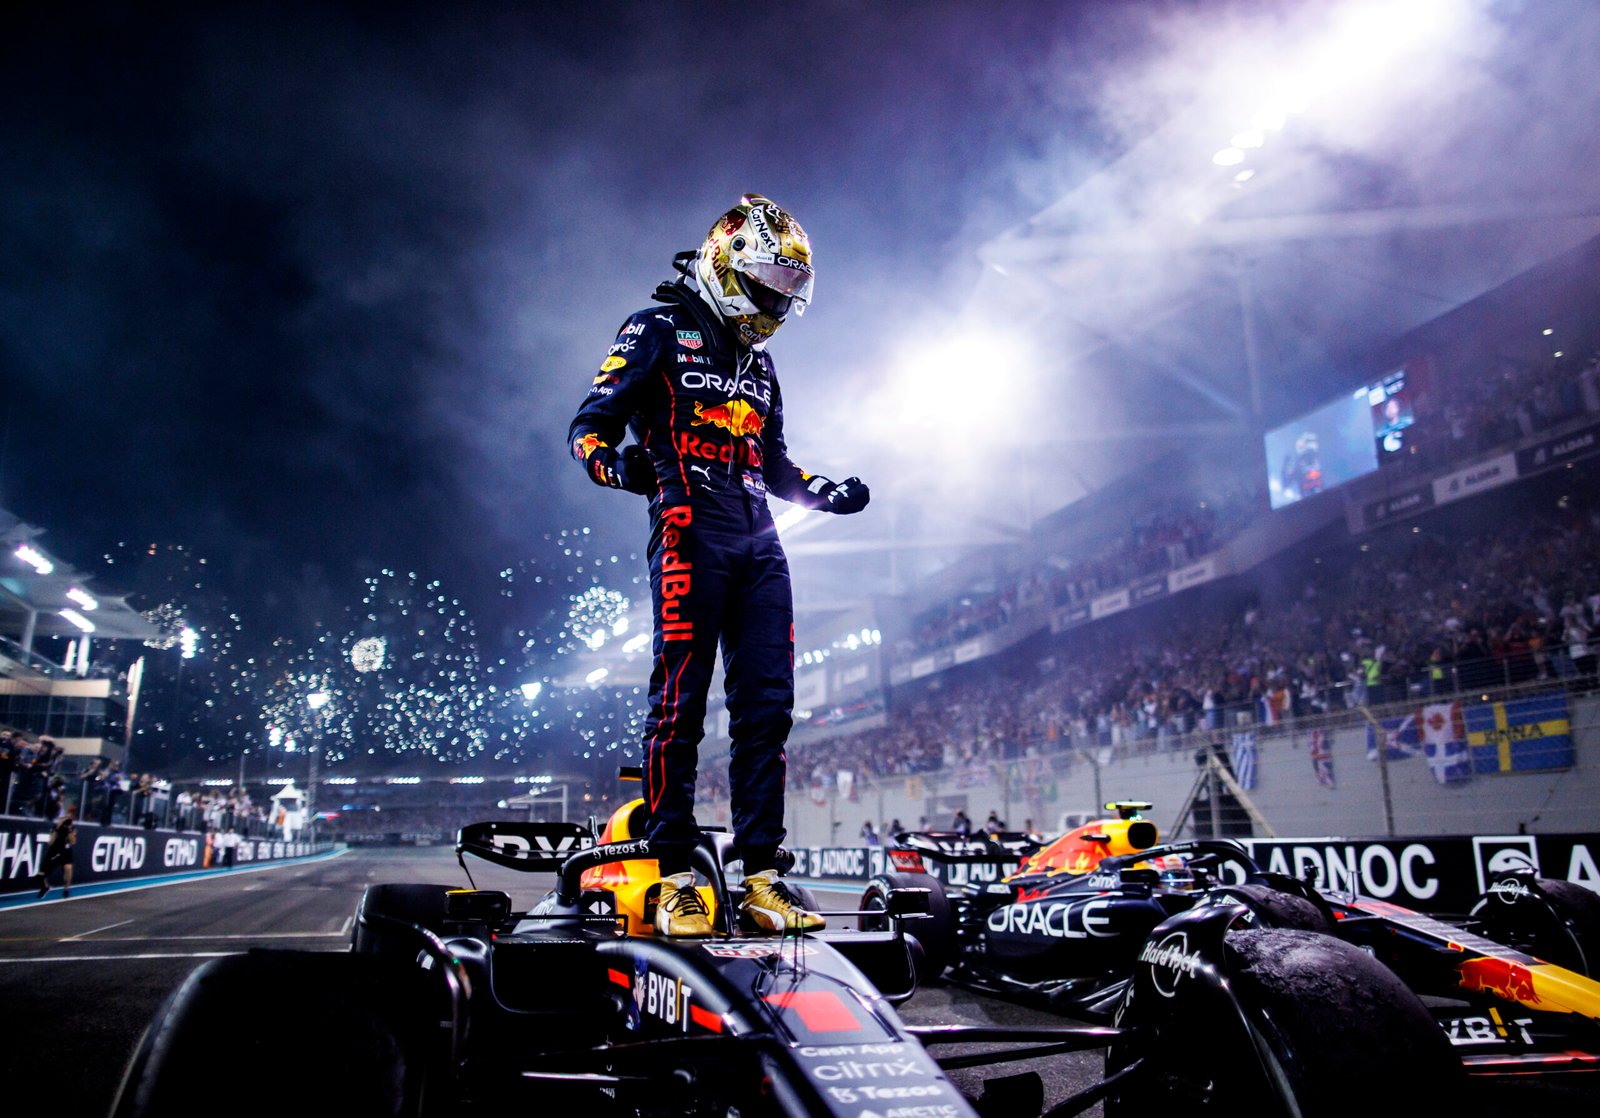 TAG HEUER CONGRATULATES MAX VERSTAPPEN AND THE ORACLE RED BULL RACING TEAM ON THEIR DOUBLE FORMULA 1 WORLD CHAMPIONSHIP WINS